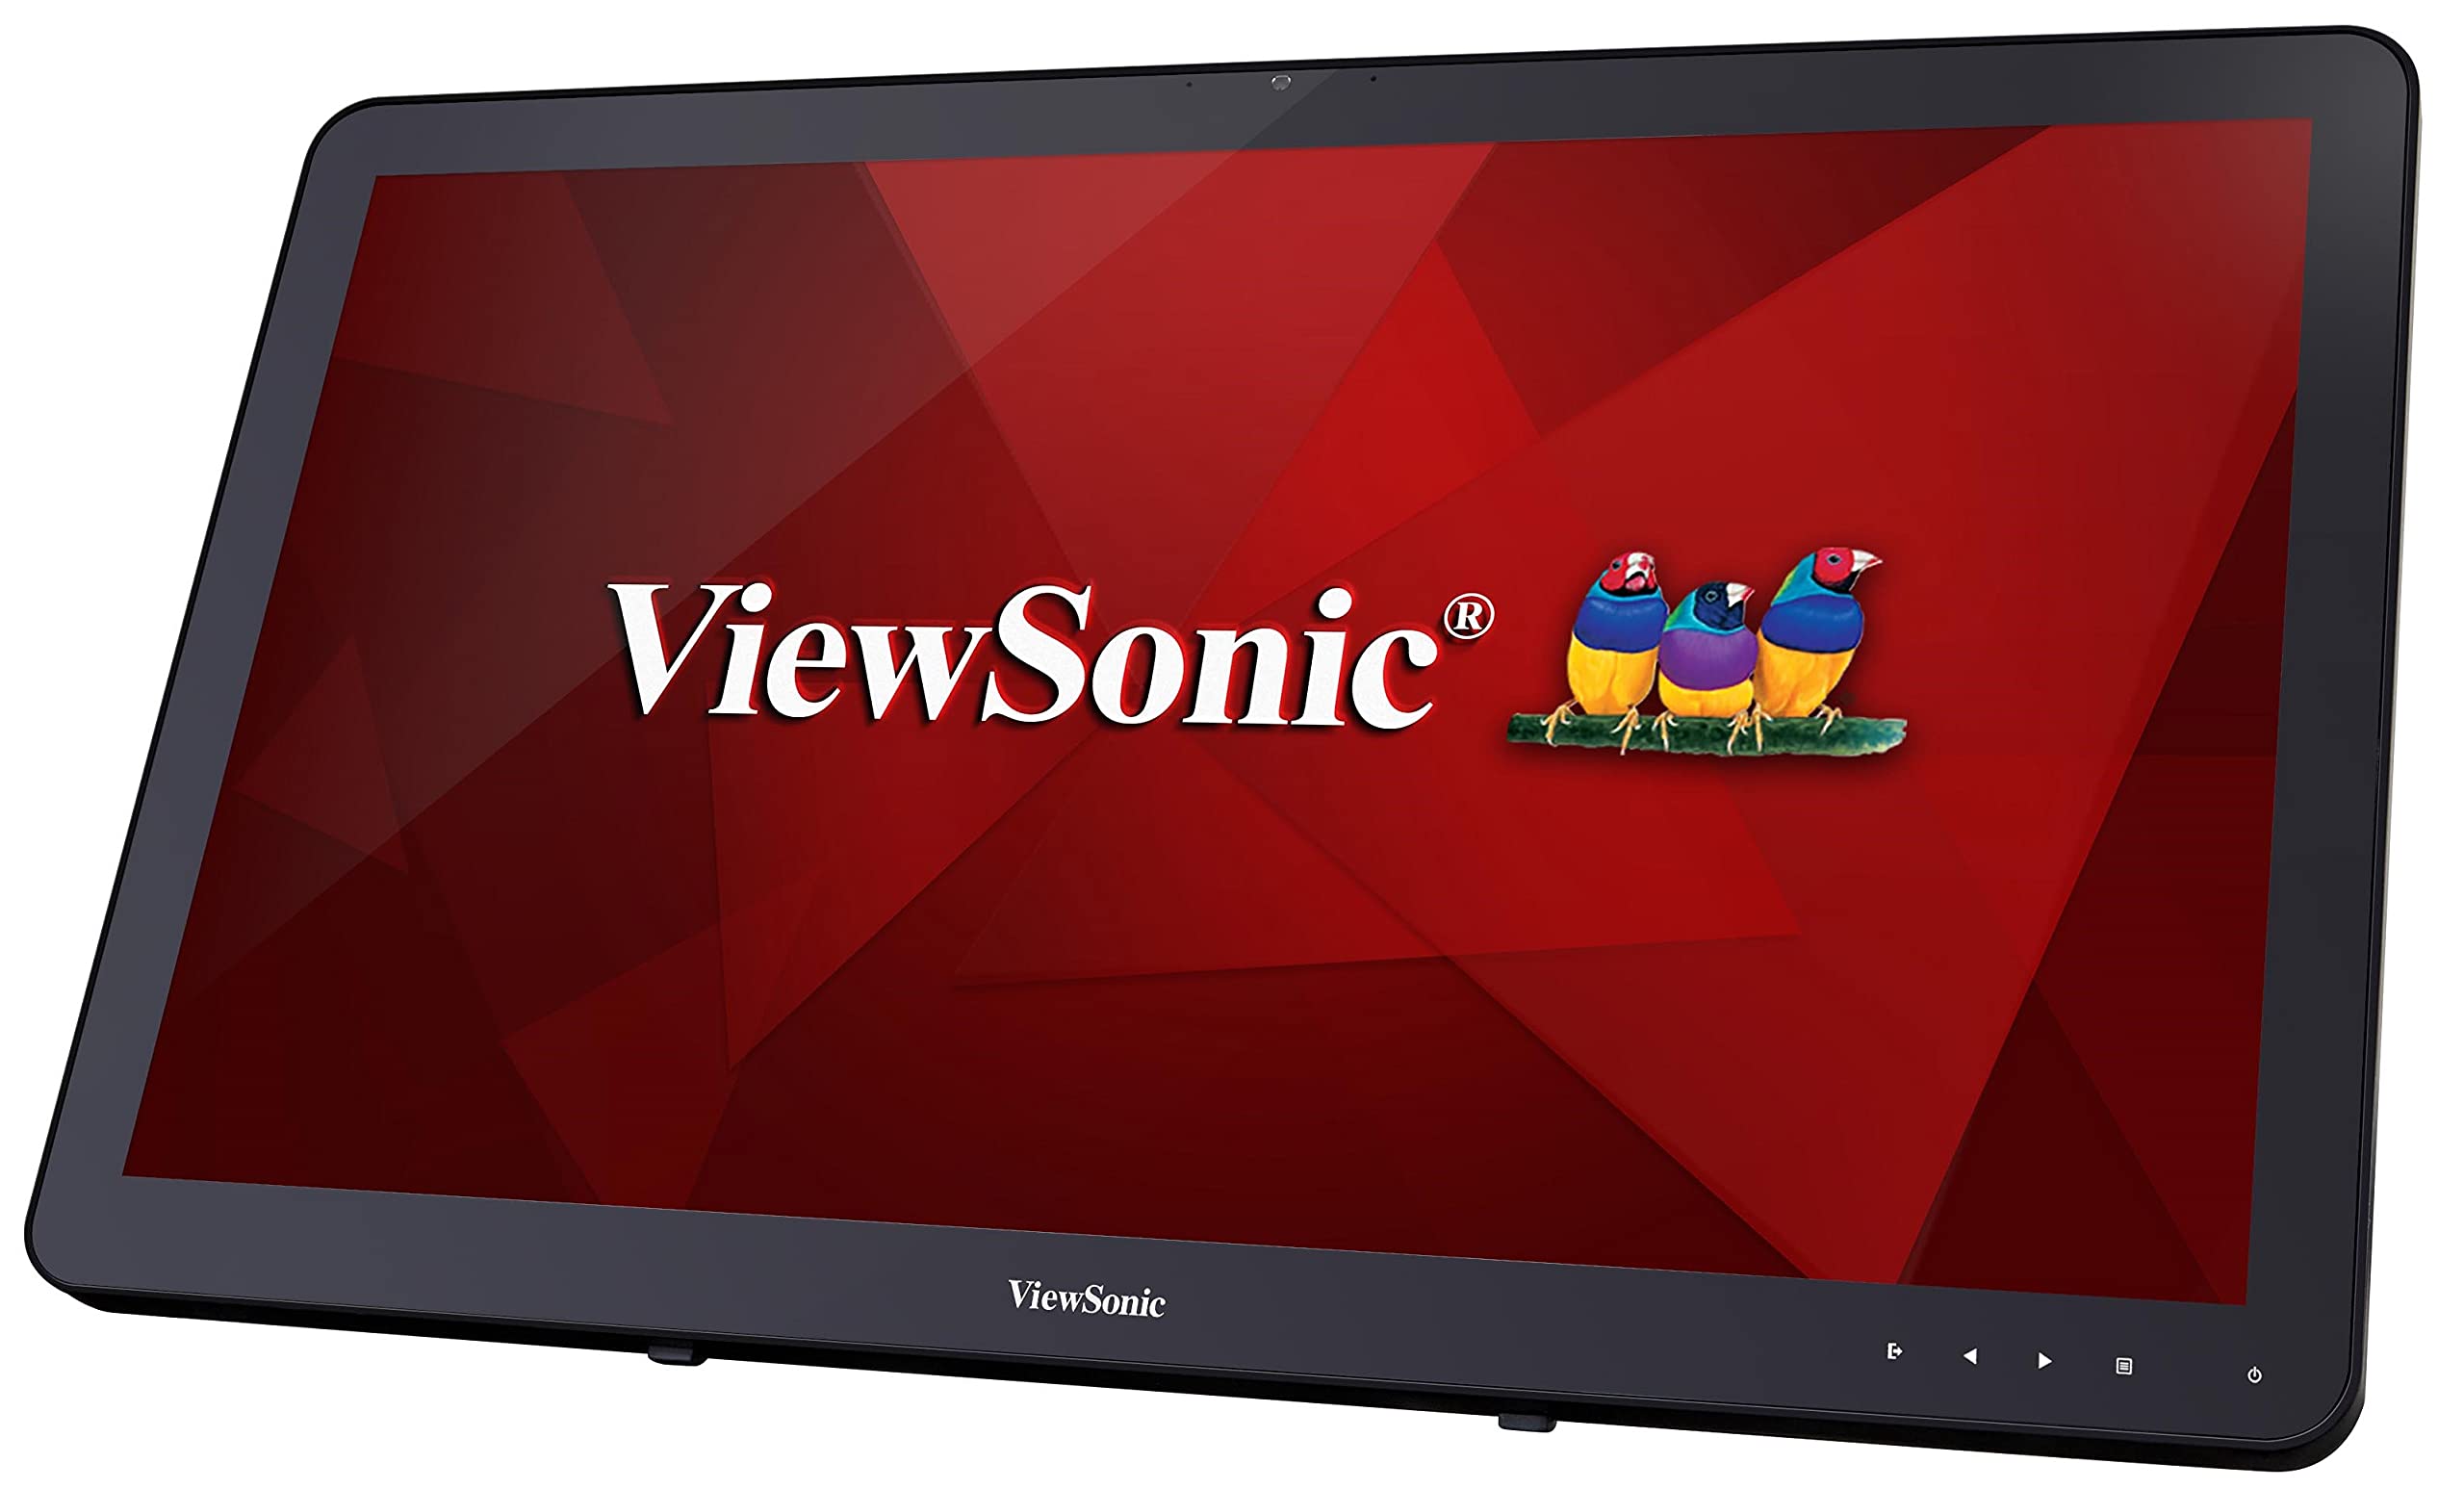 ViewSonic TD2430 24 Inch 1080p 10-Point Multi Touch Screen Monitor with HDMI and DisplayPort $209.99 + Free Shipping